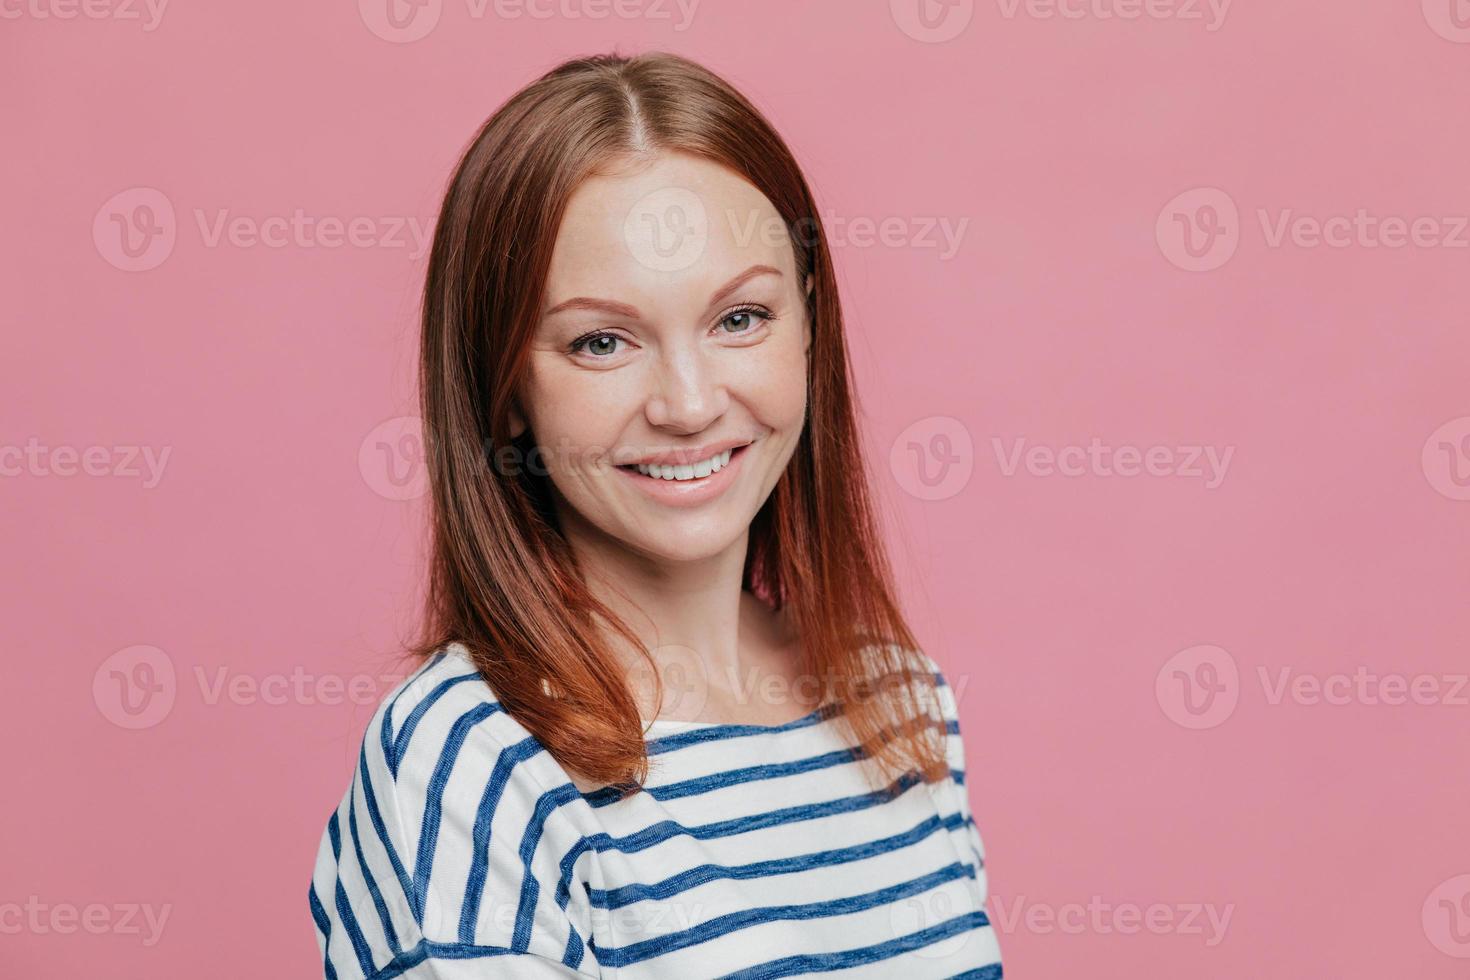 Sideways shot of pleasant looking happy brown haired woman with straight hair, healthy skin, pleasant smile, dressed in casual striped sweater, isolated over pink background. Emotions concept photo